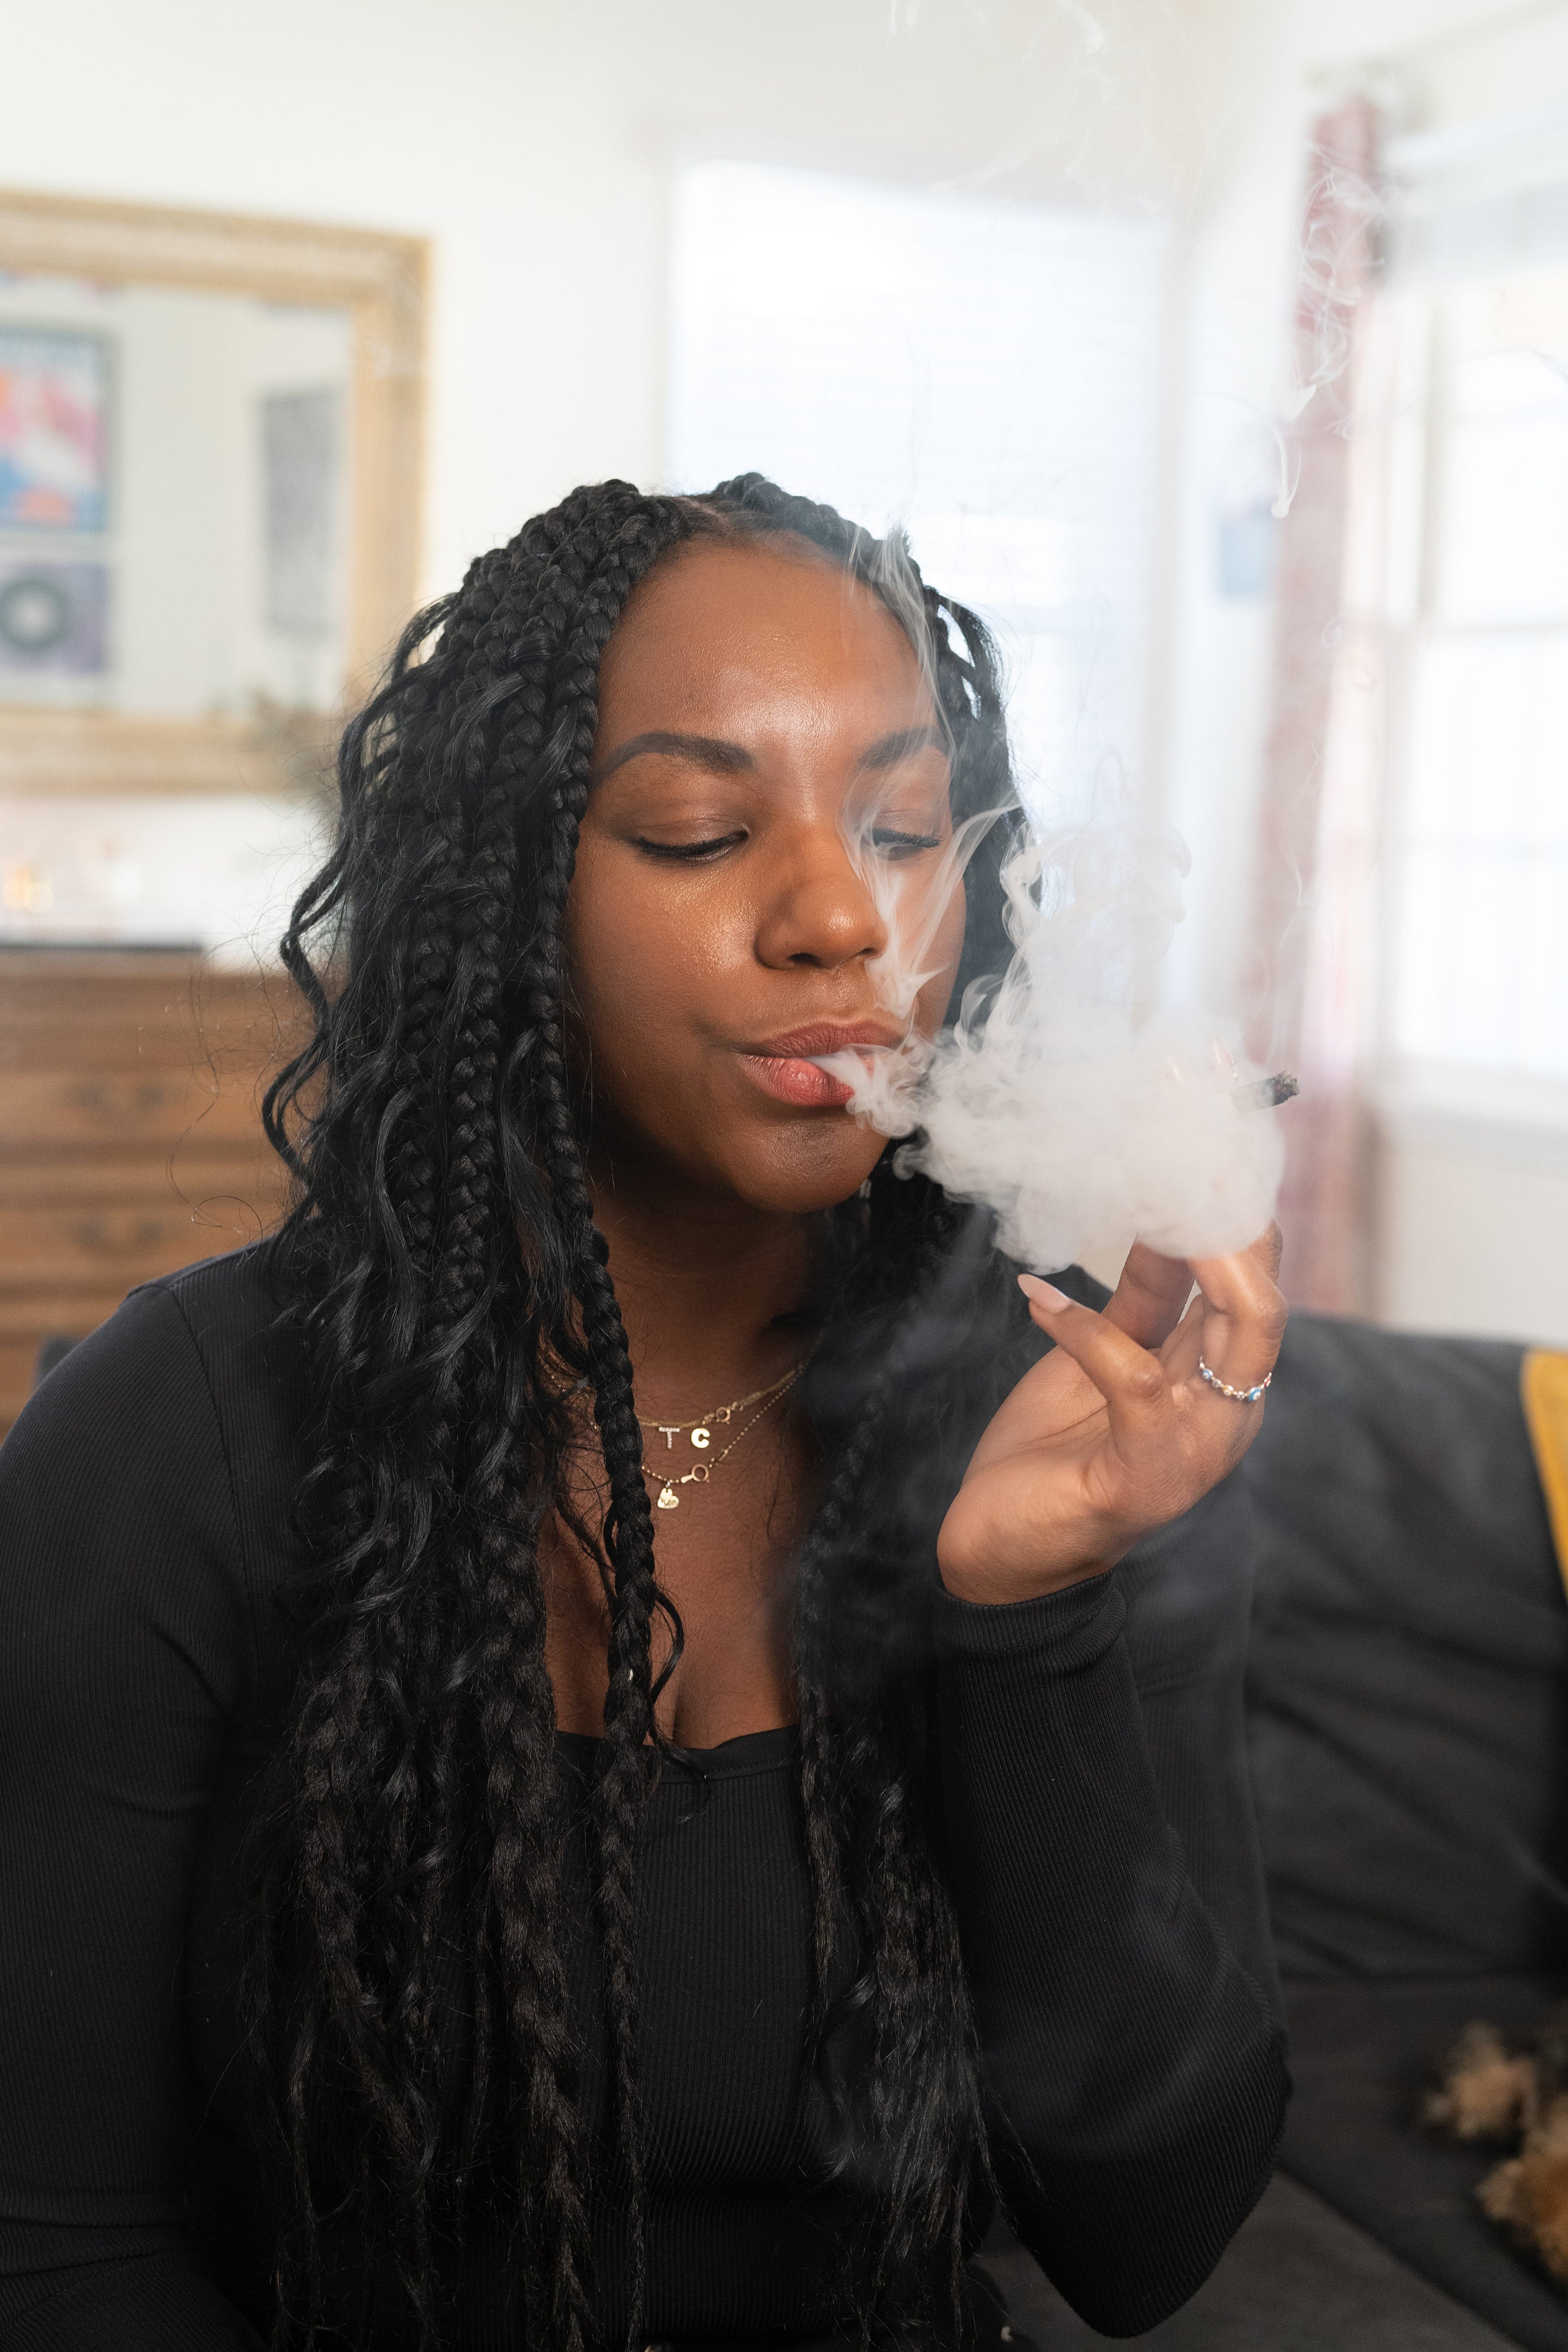 The founder of Saucy, Tess Taylor, smoking a joint